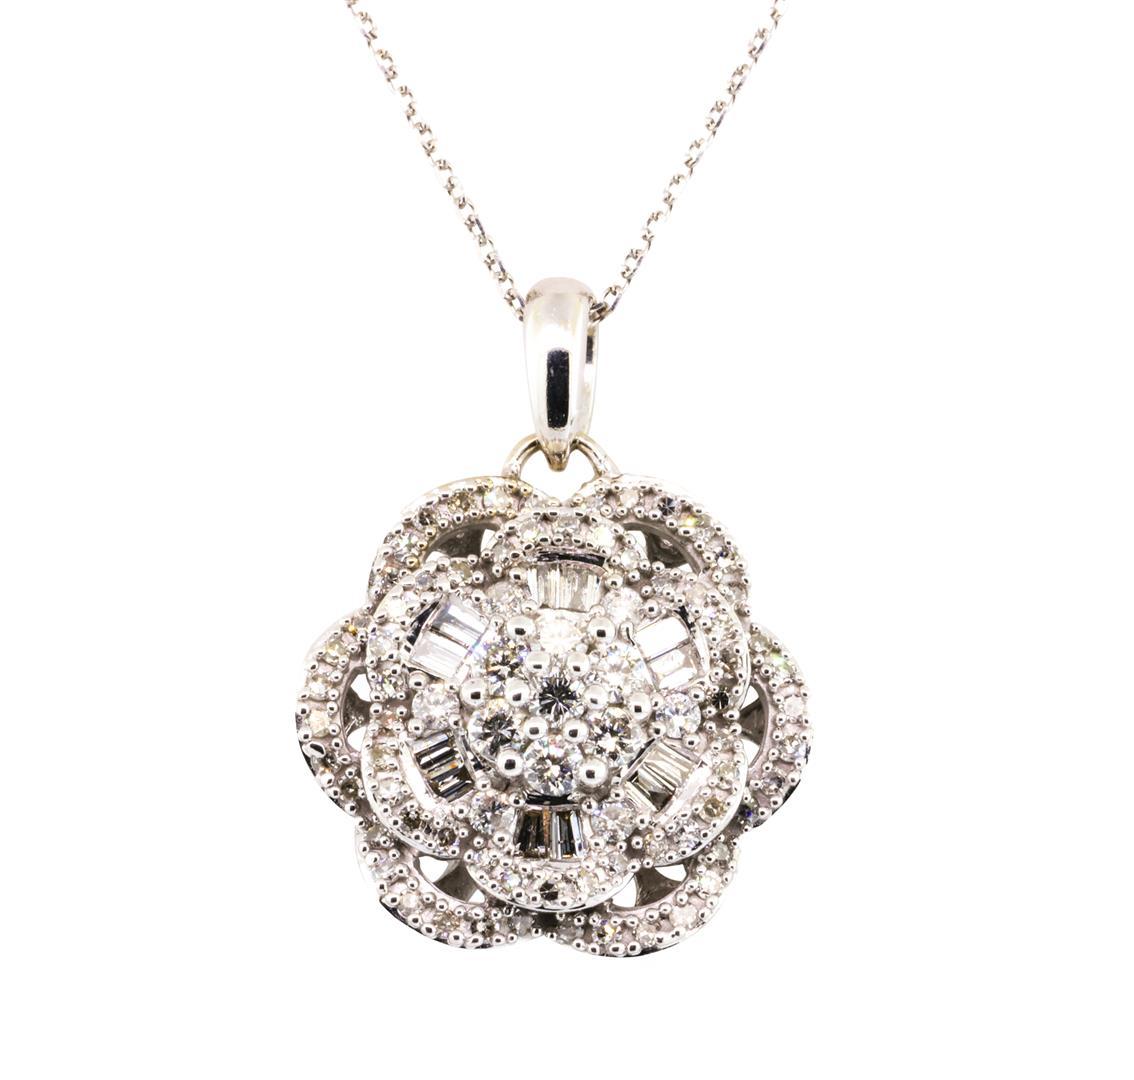 1.00 ctw Diamond Floral Motif Pendant with Chain - 14KT White Gold